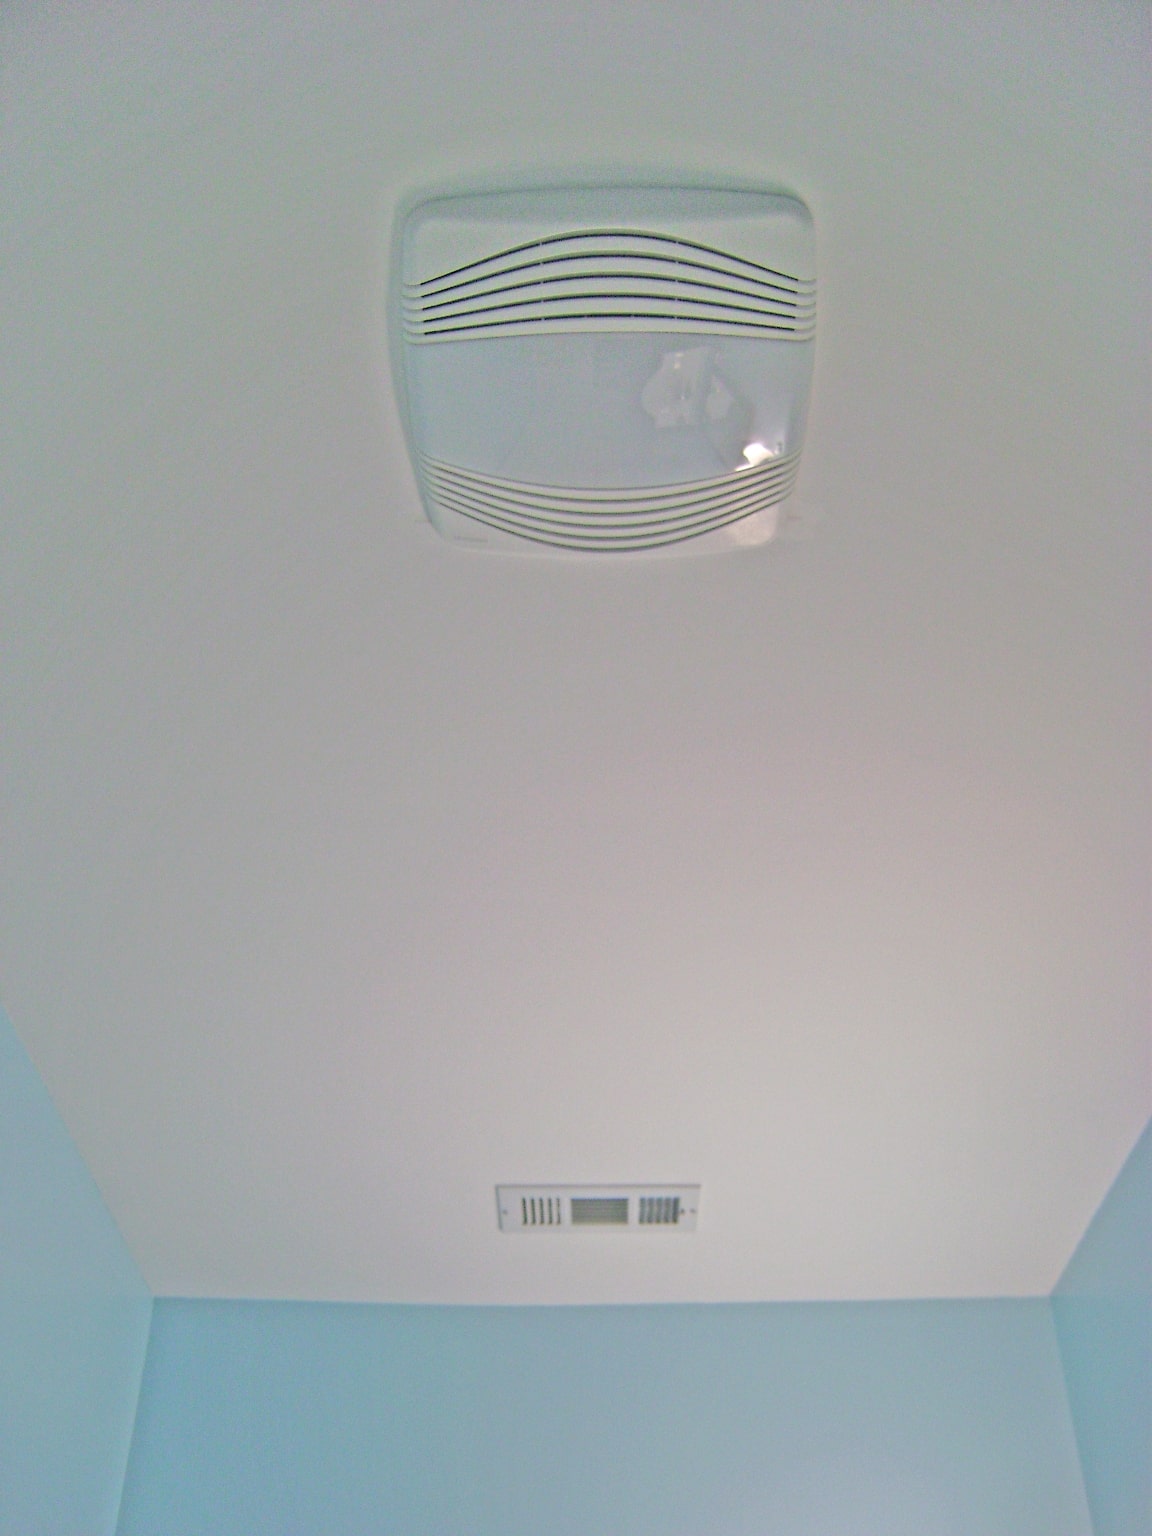 GETTING THE BATHROOM EXHAUST FAN OUT THROUGH THE WALL. - JON EAKES. title=